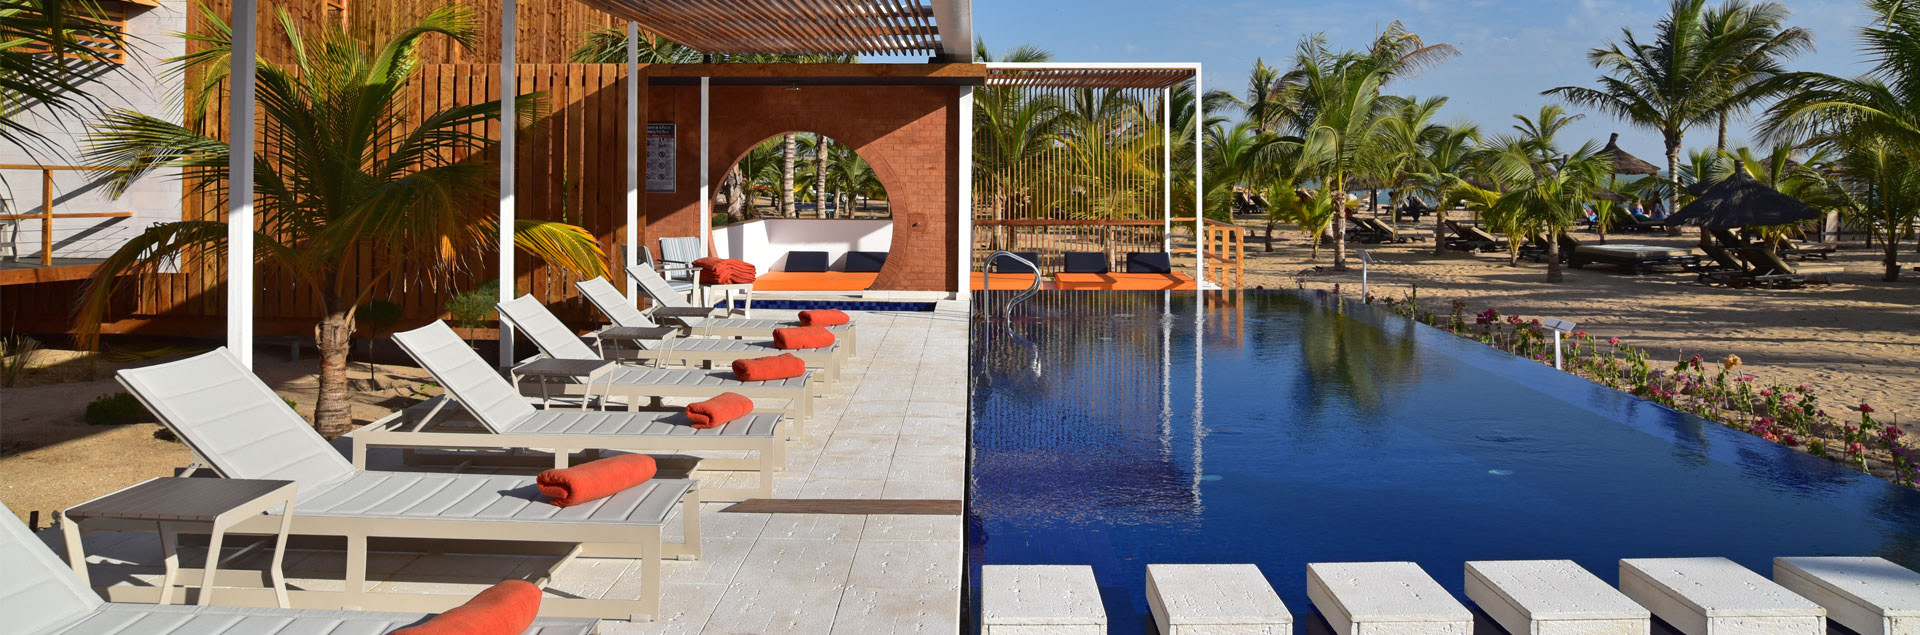 chambres-blue-bay-senegal-hotel-luxe-02